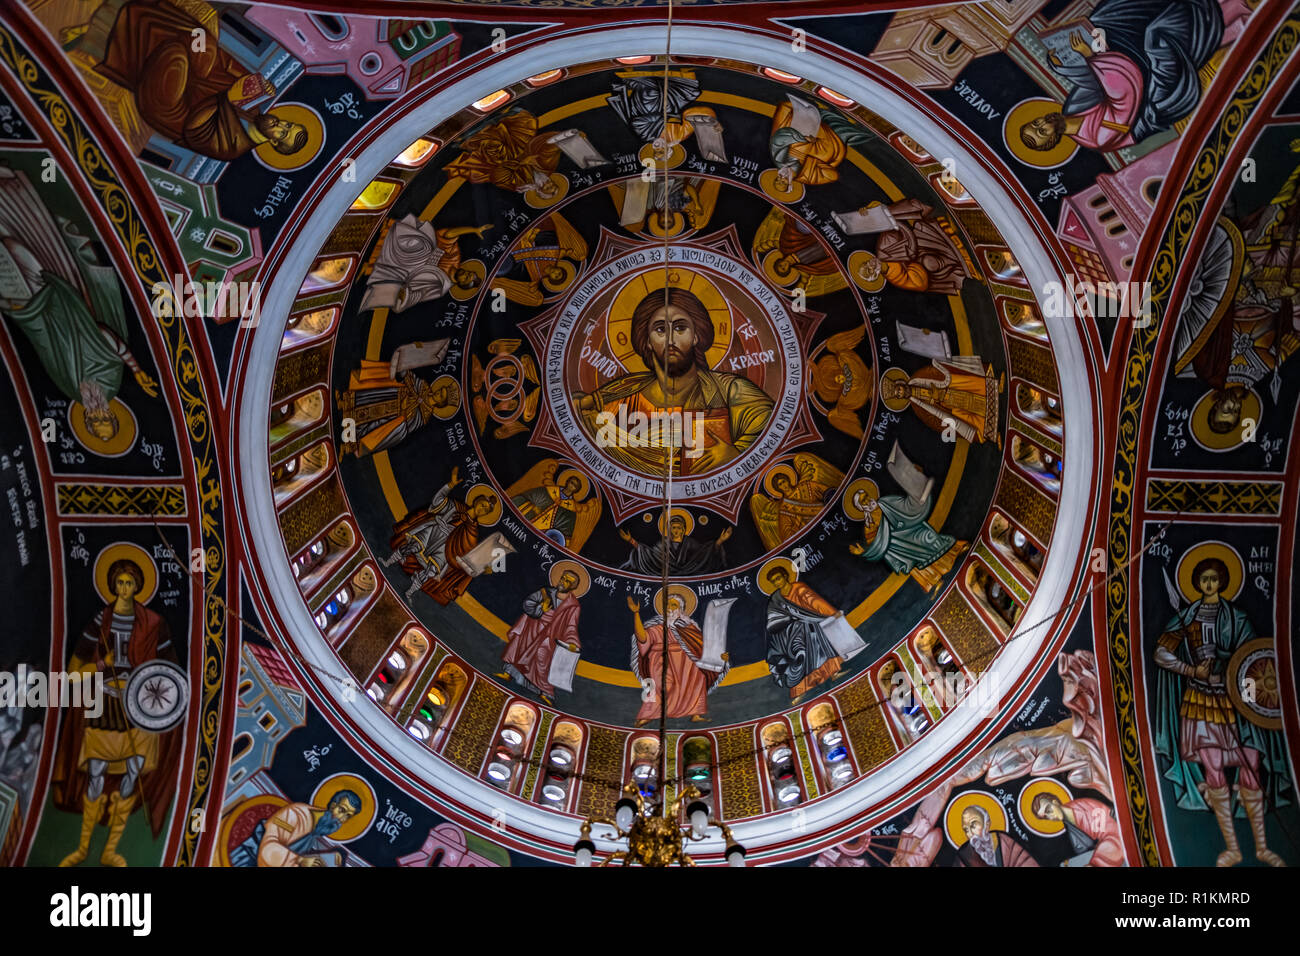 The painting of the arch of the Orthodox Church in Greece 2018 Stock Photo